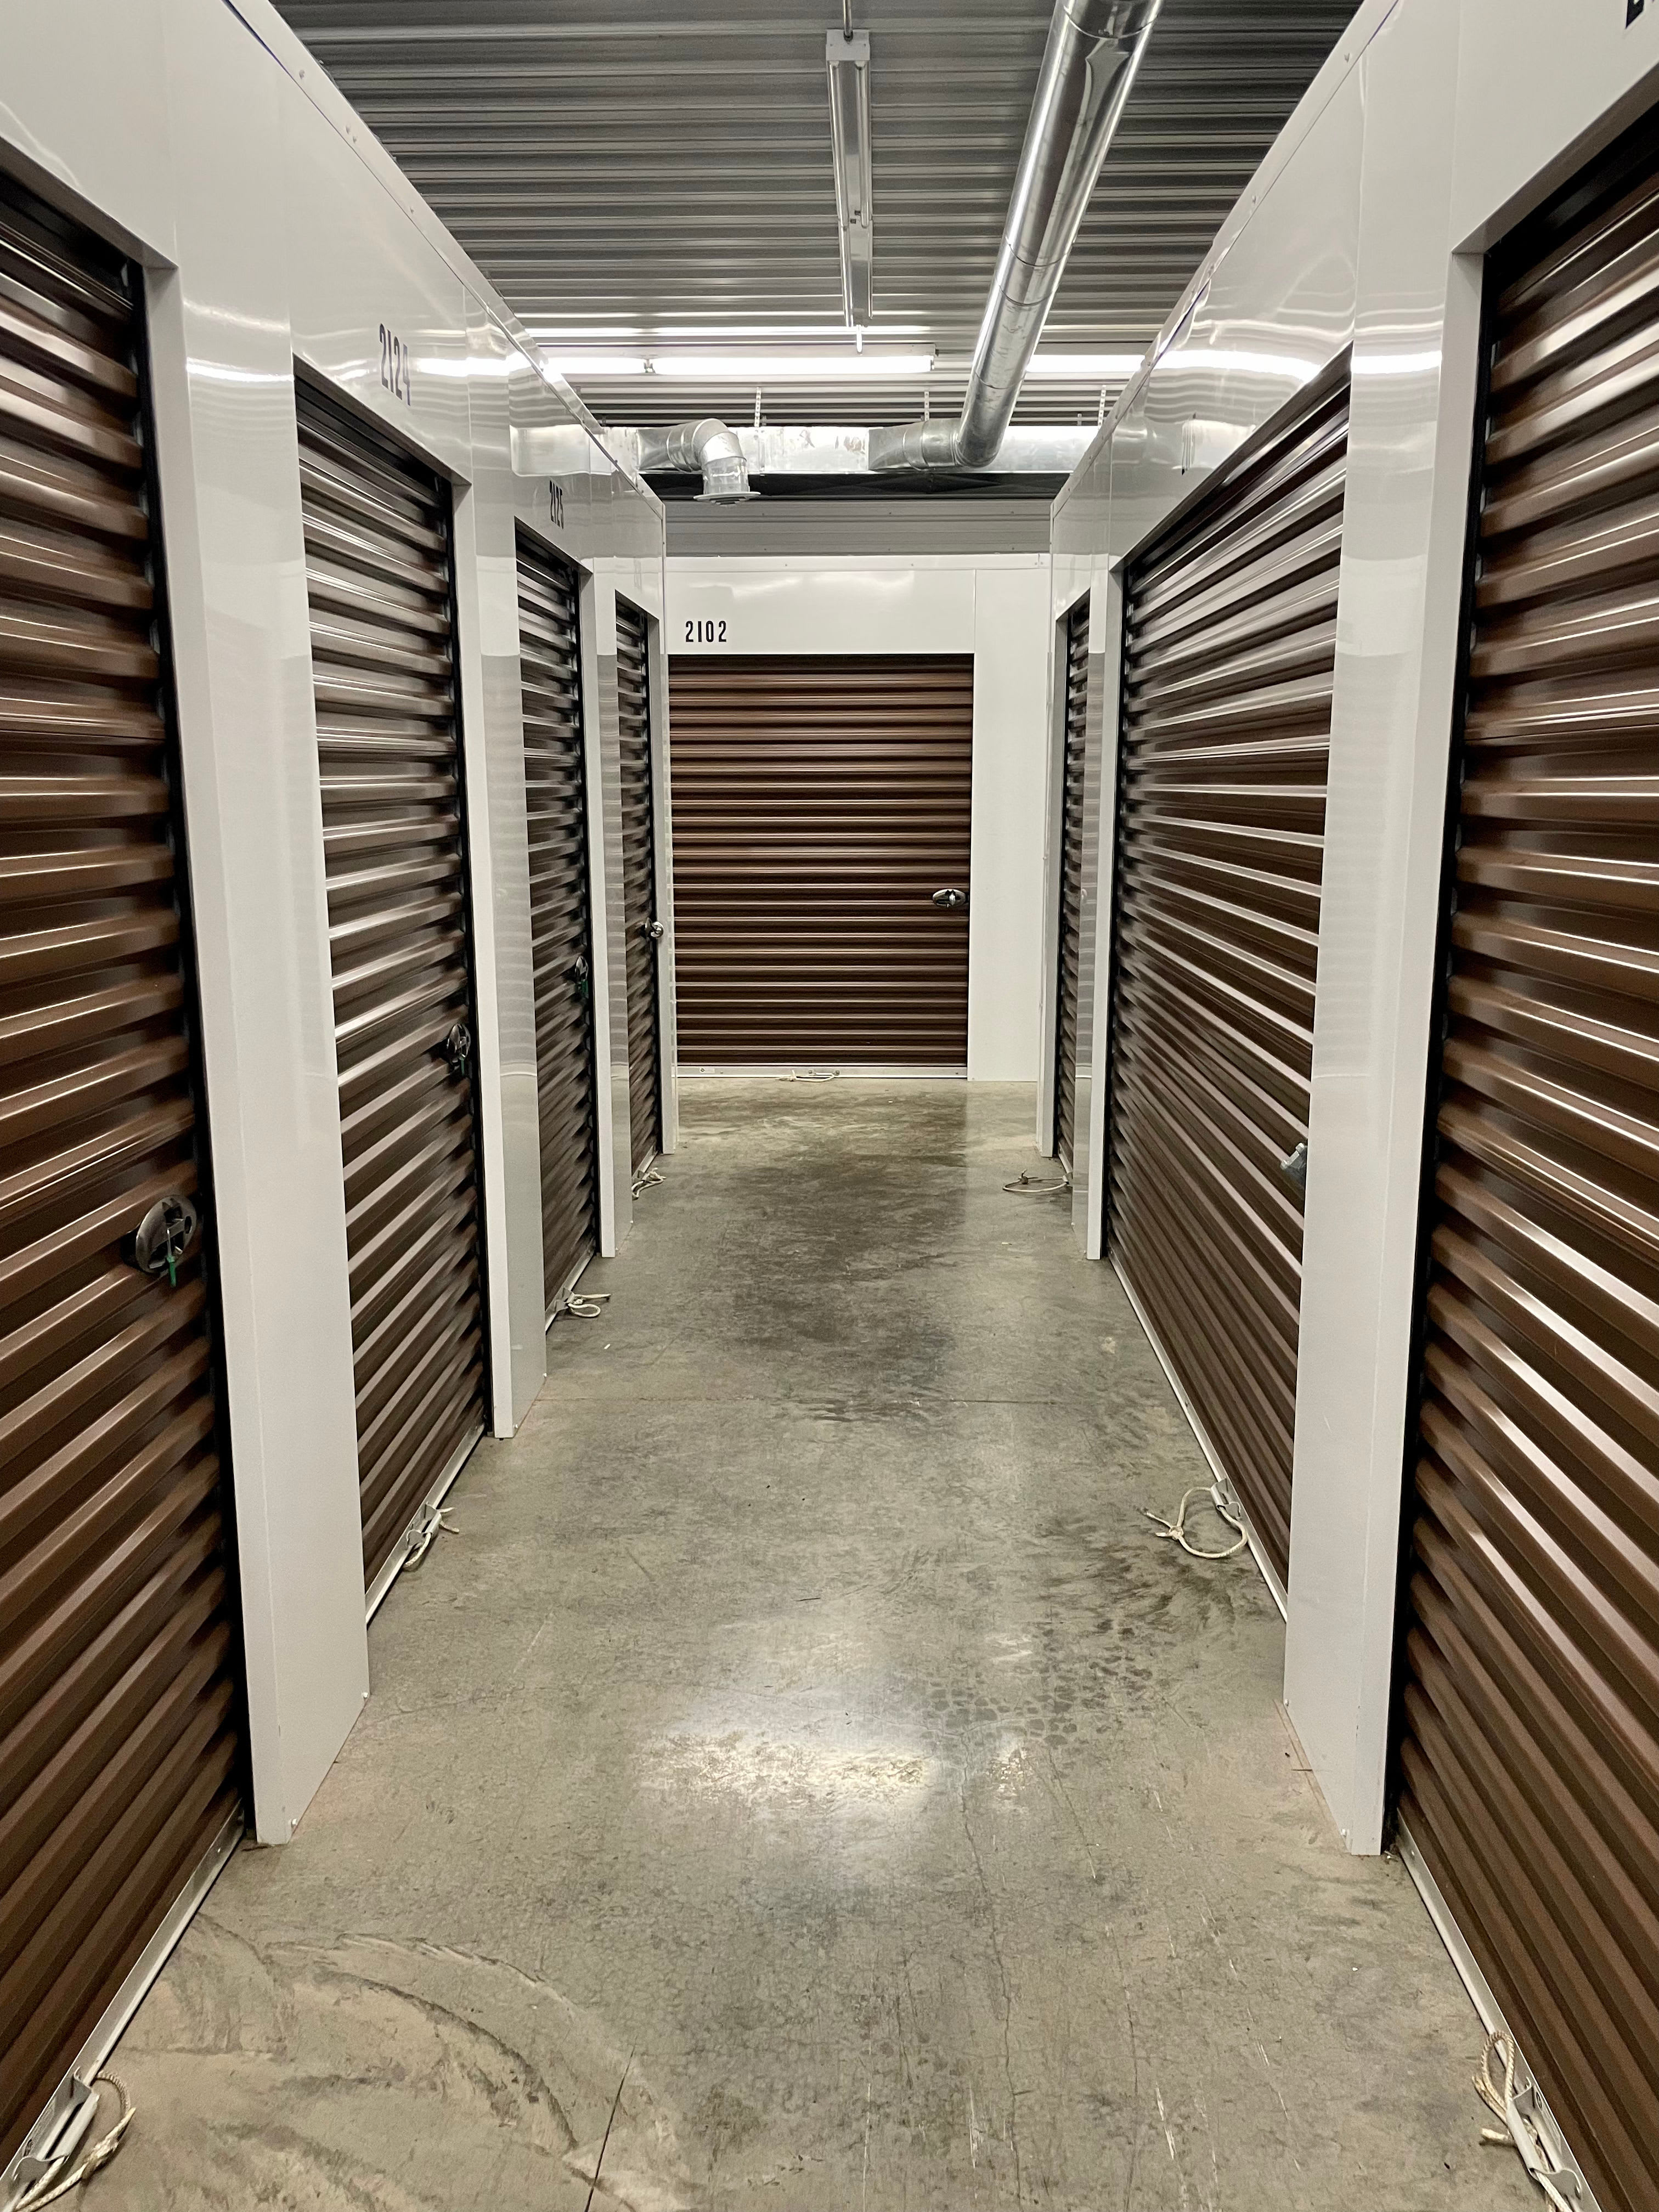 Learn more about features at KO Storage of Watertown - Hwy 283 in Watertown, New York